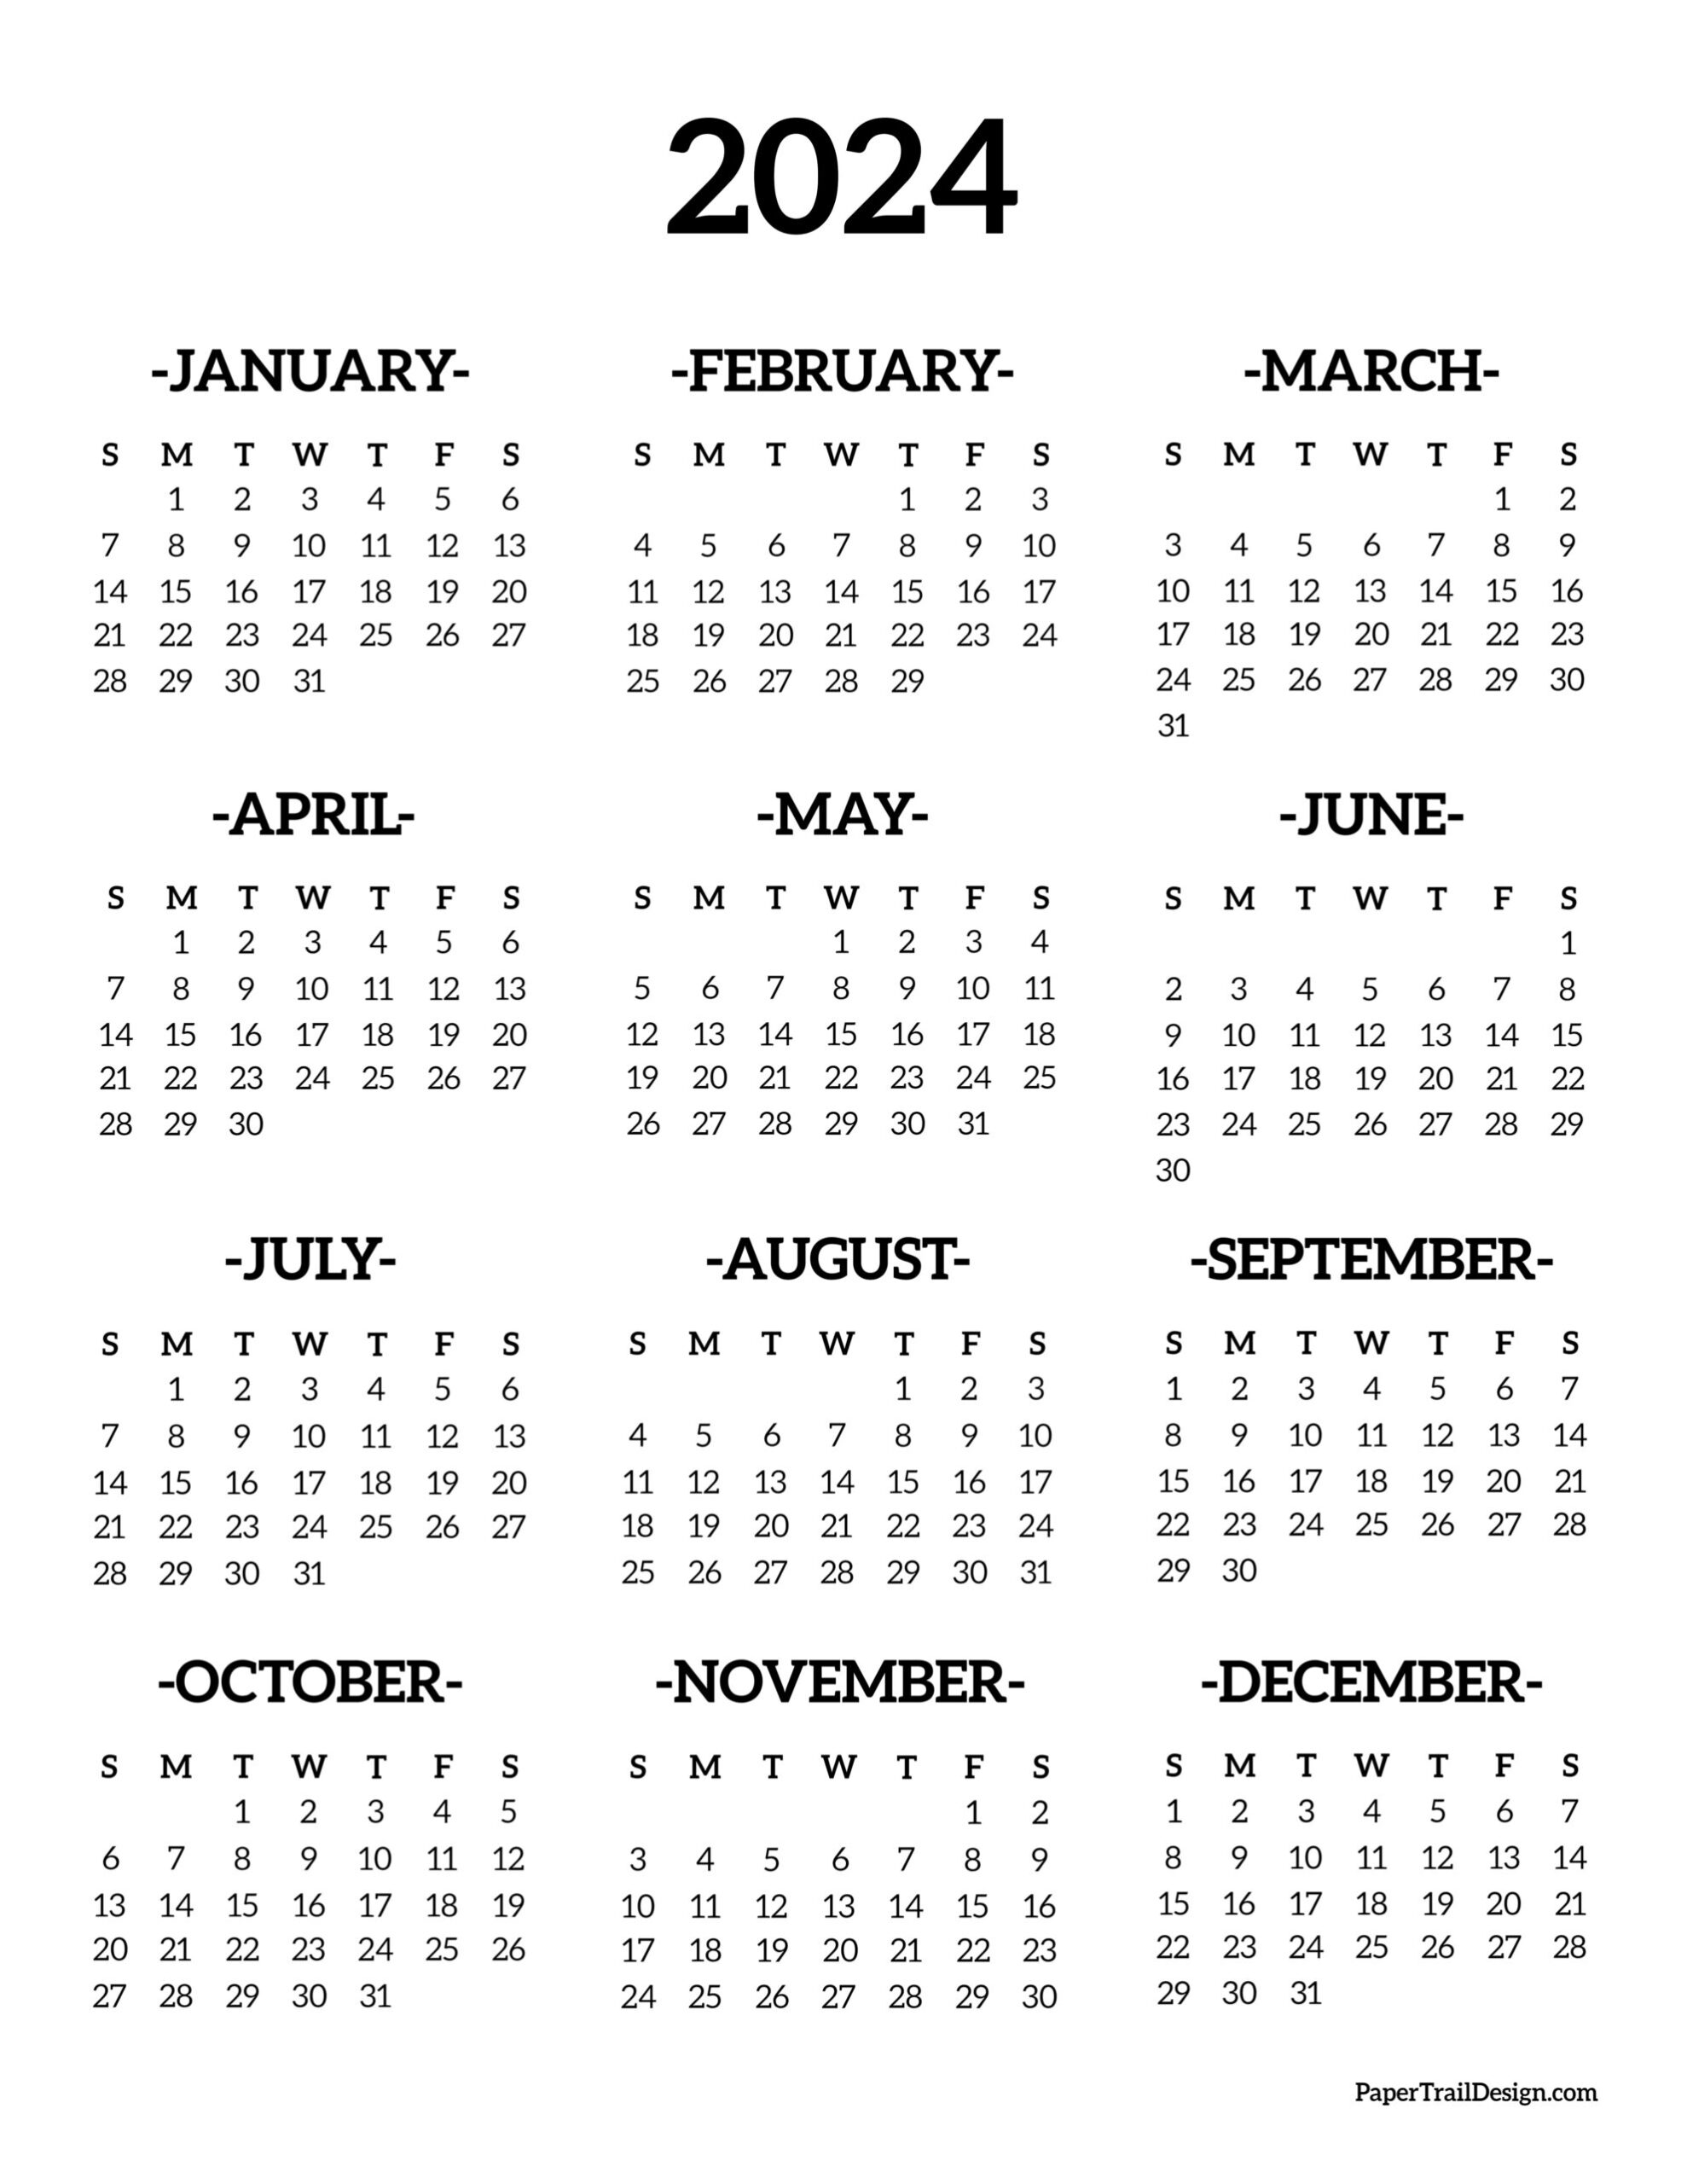 Calendar 2024 Printable One Page - Paper Trail Design for Free Printable 2024 Annual Calendar